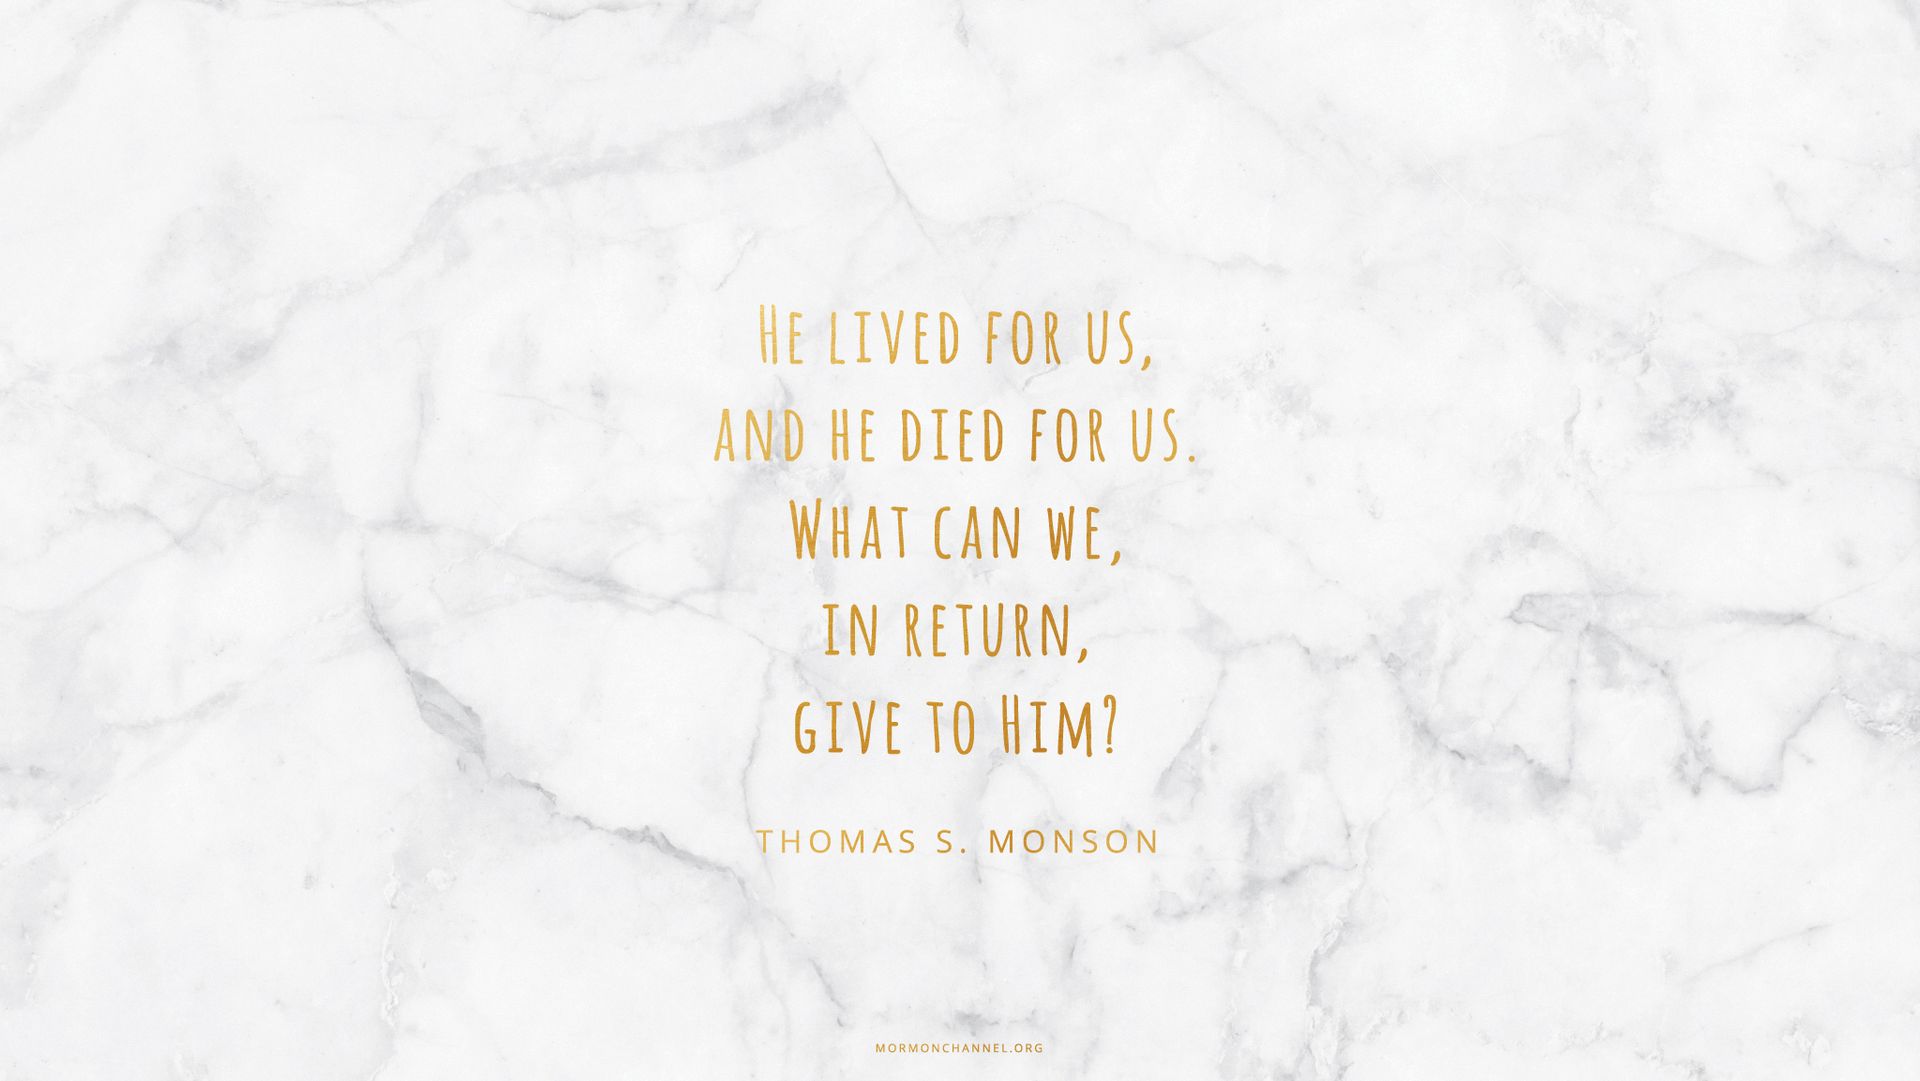 “He lived for us, and He died for us. What can we, in return, give to Him?”—President Thomas S. Monson, “The Real Joy of Christmas”